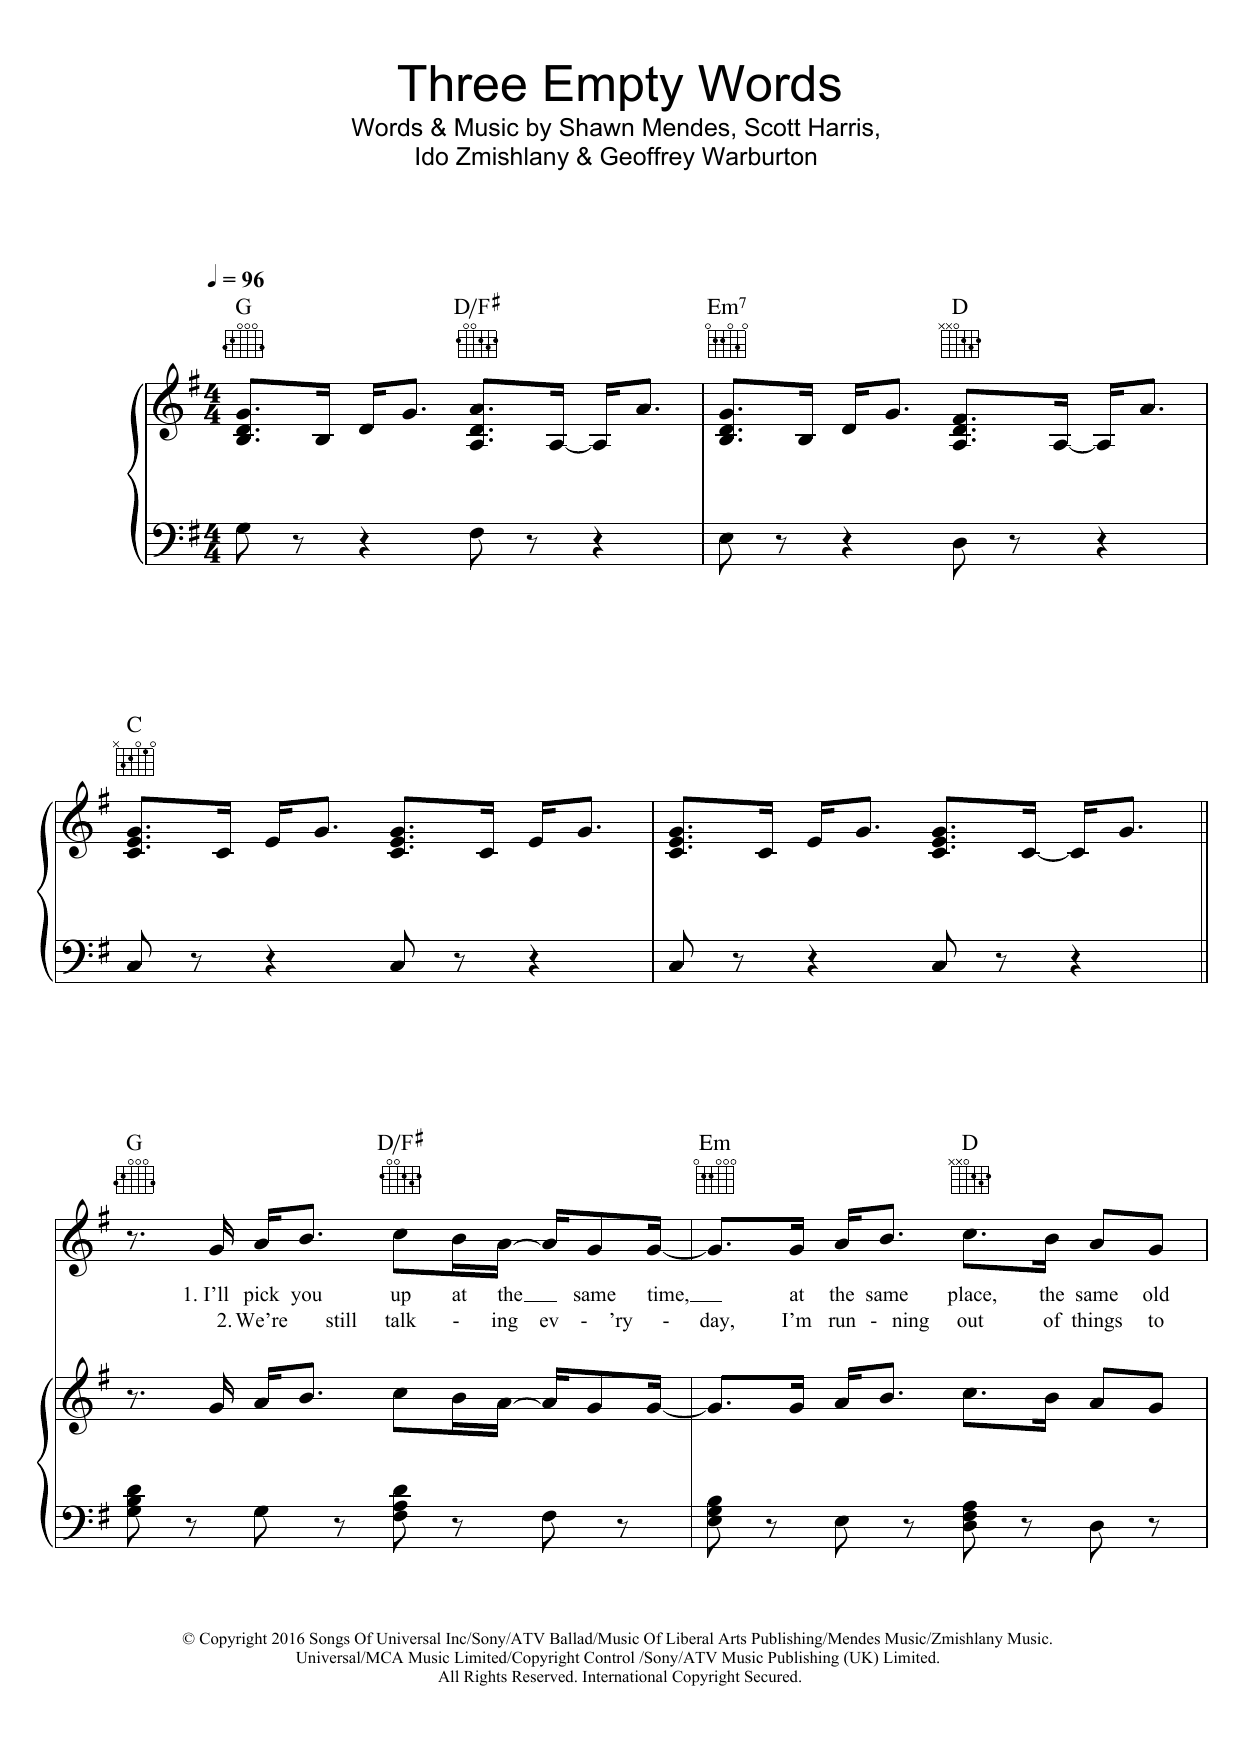 Download Shawn Mendes Three Empty Words Sheet Music